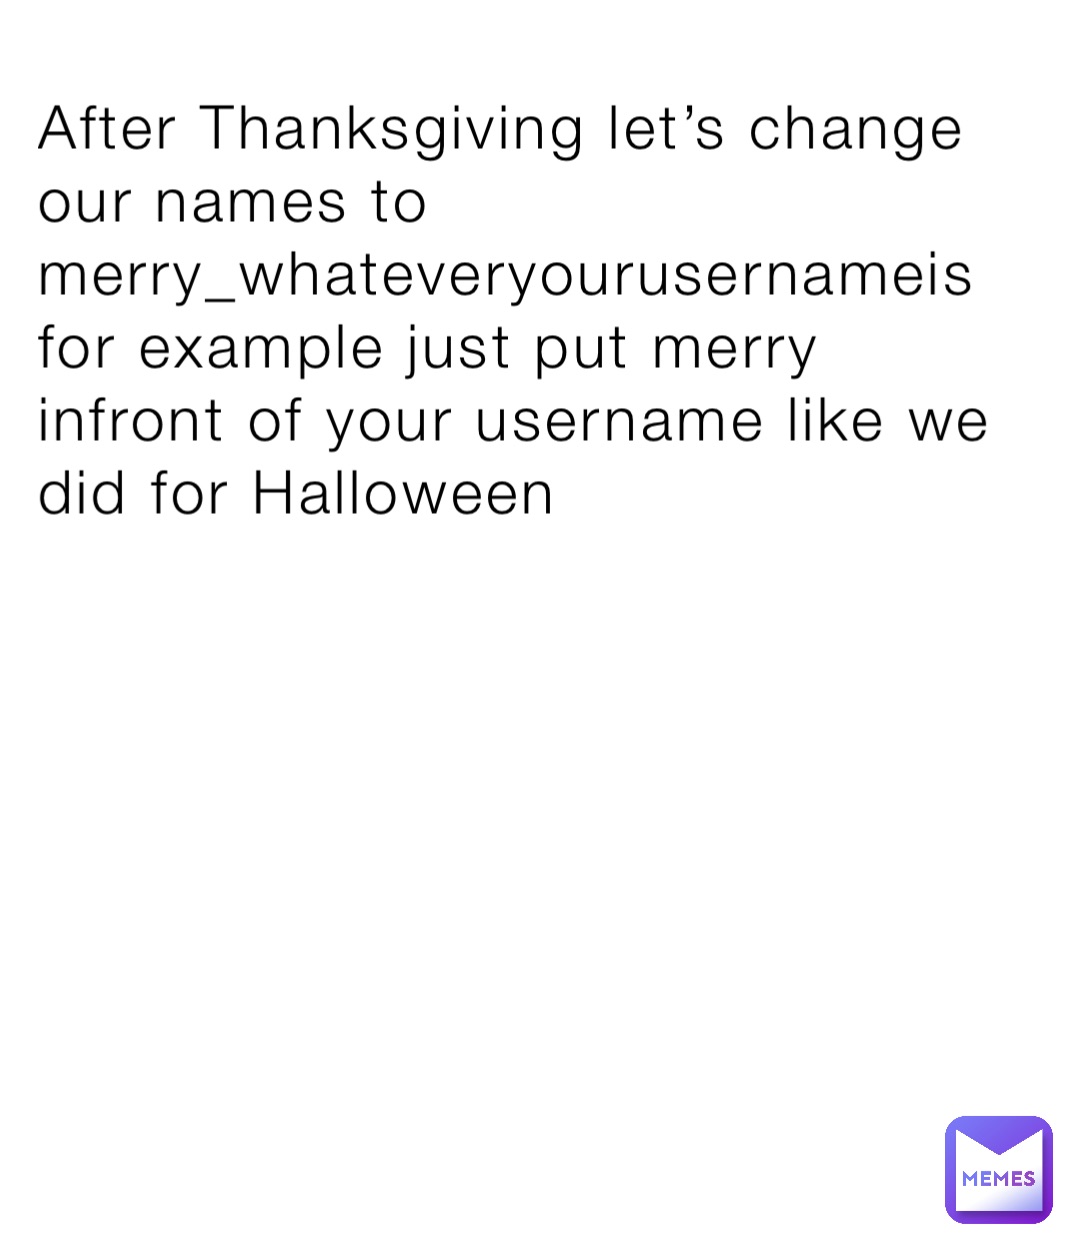 After Thanksgiving let’s change our names to merry_whateveryourusernameis for example just put merry infront of your username like we did for Halloween